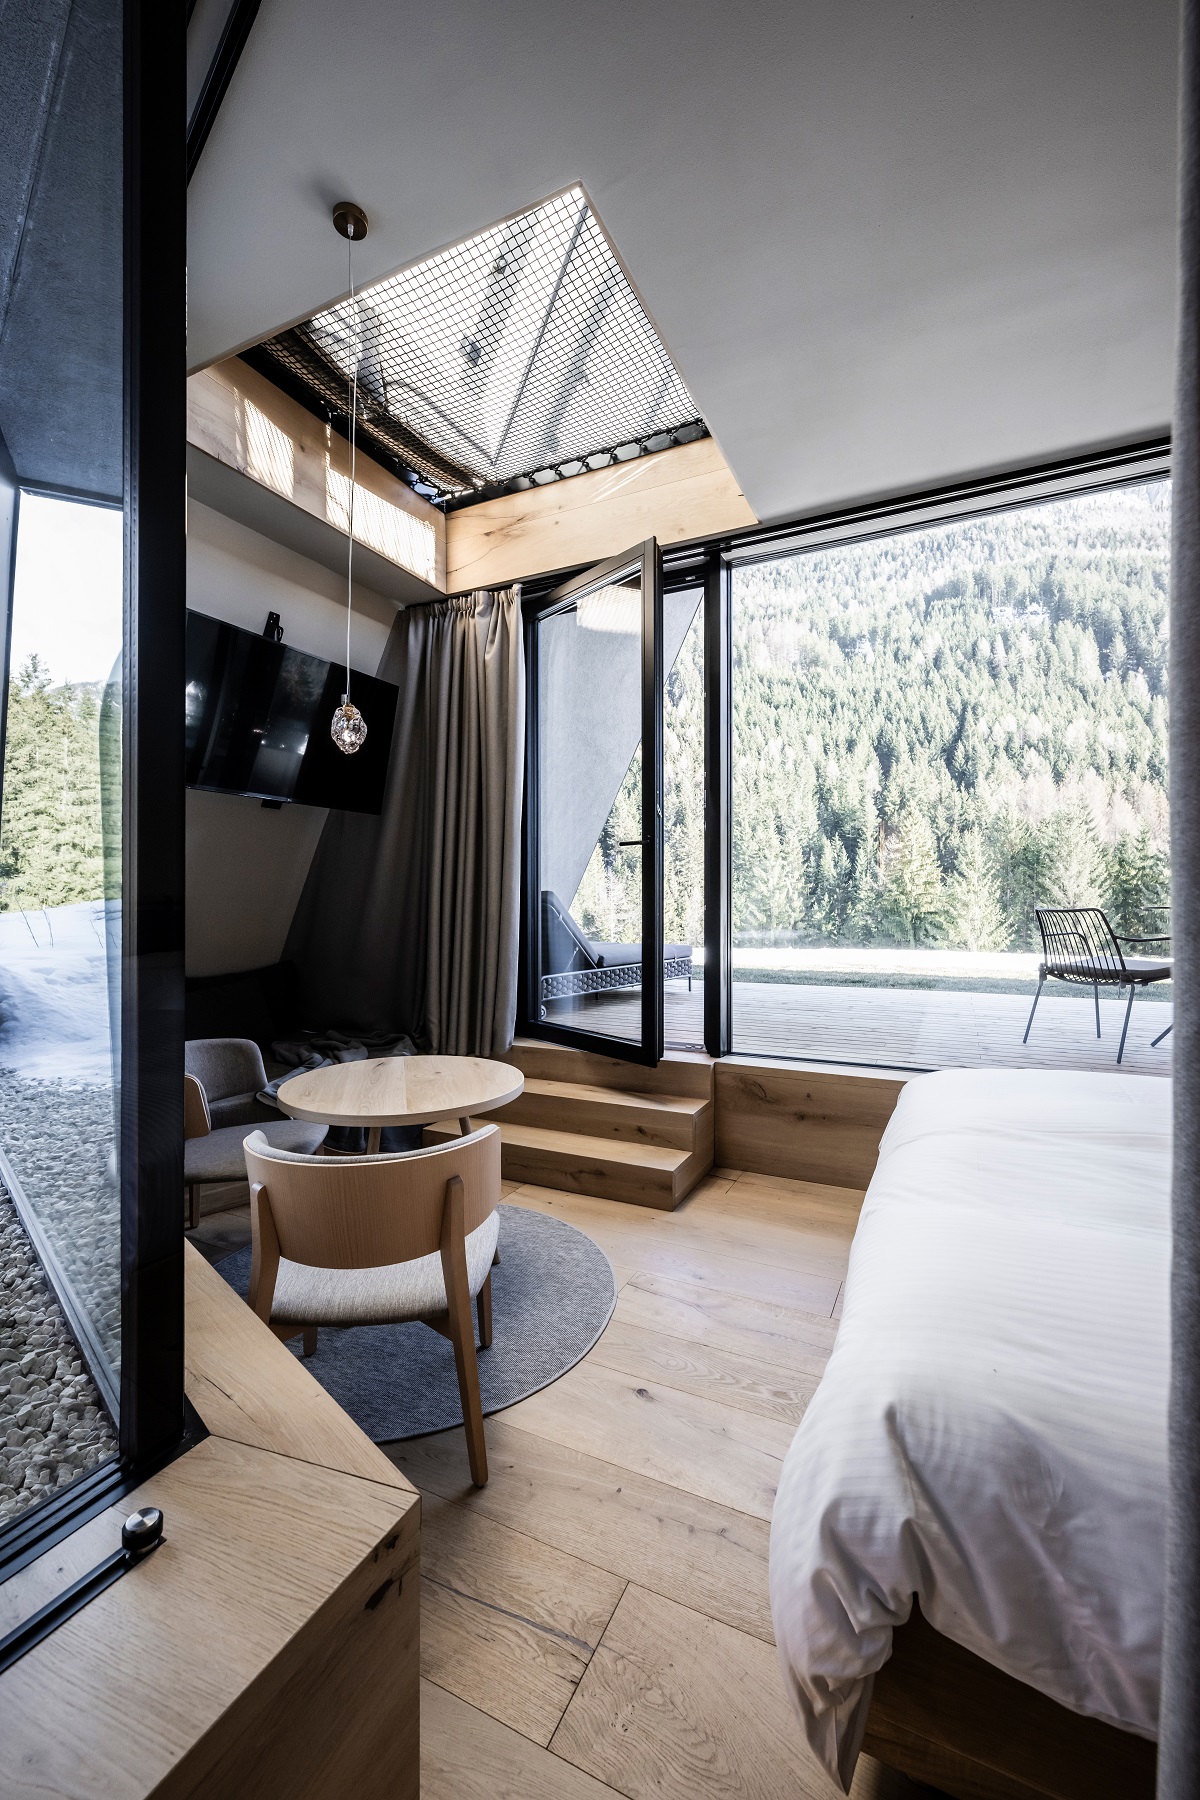 view from guestroom to mountains showing angular glass corners of the windows and a skylight